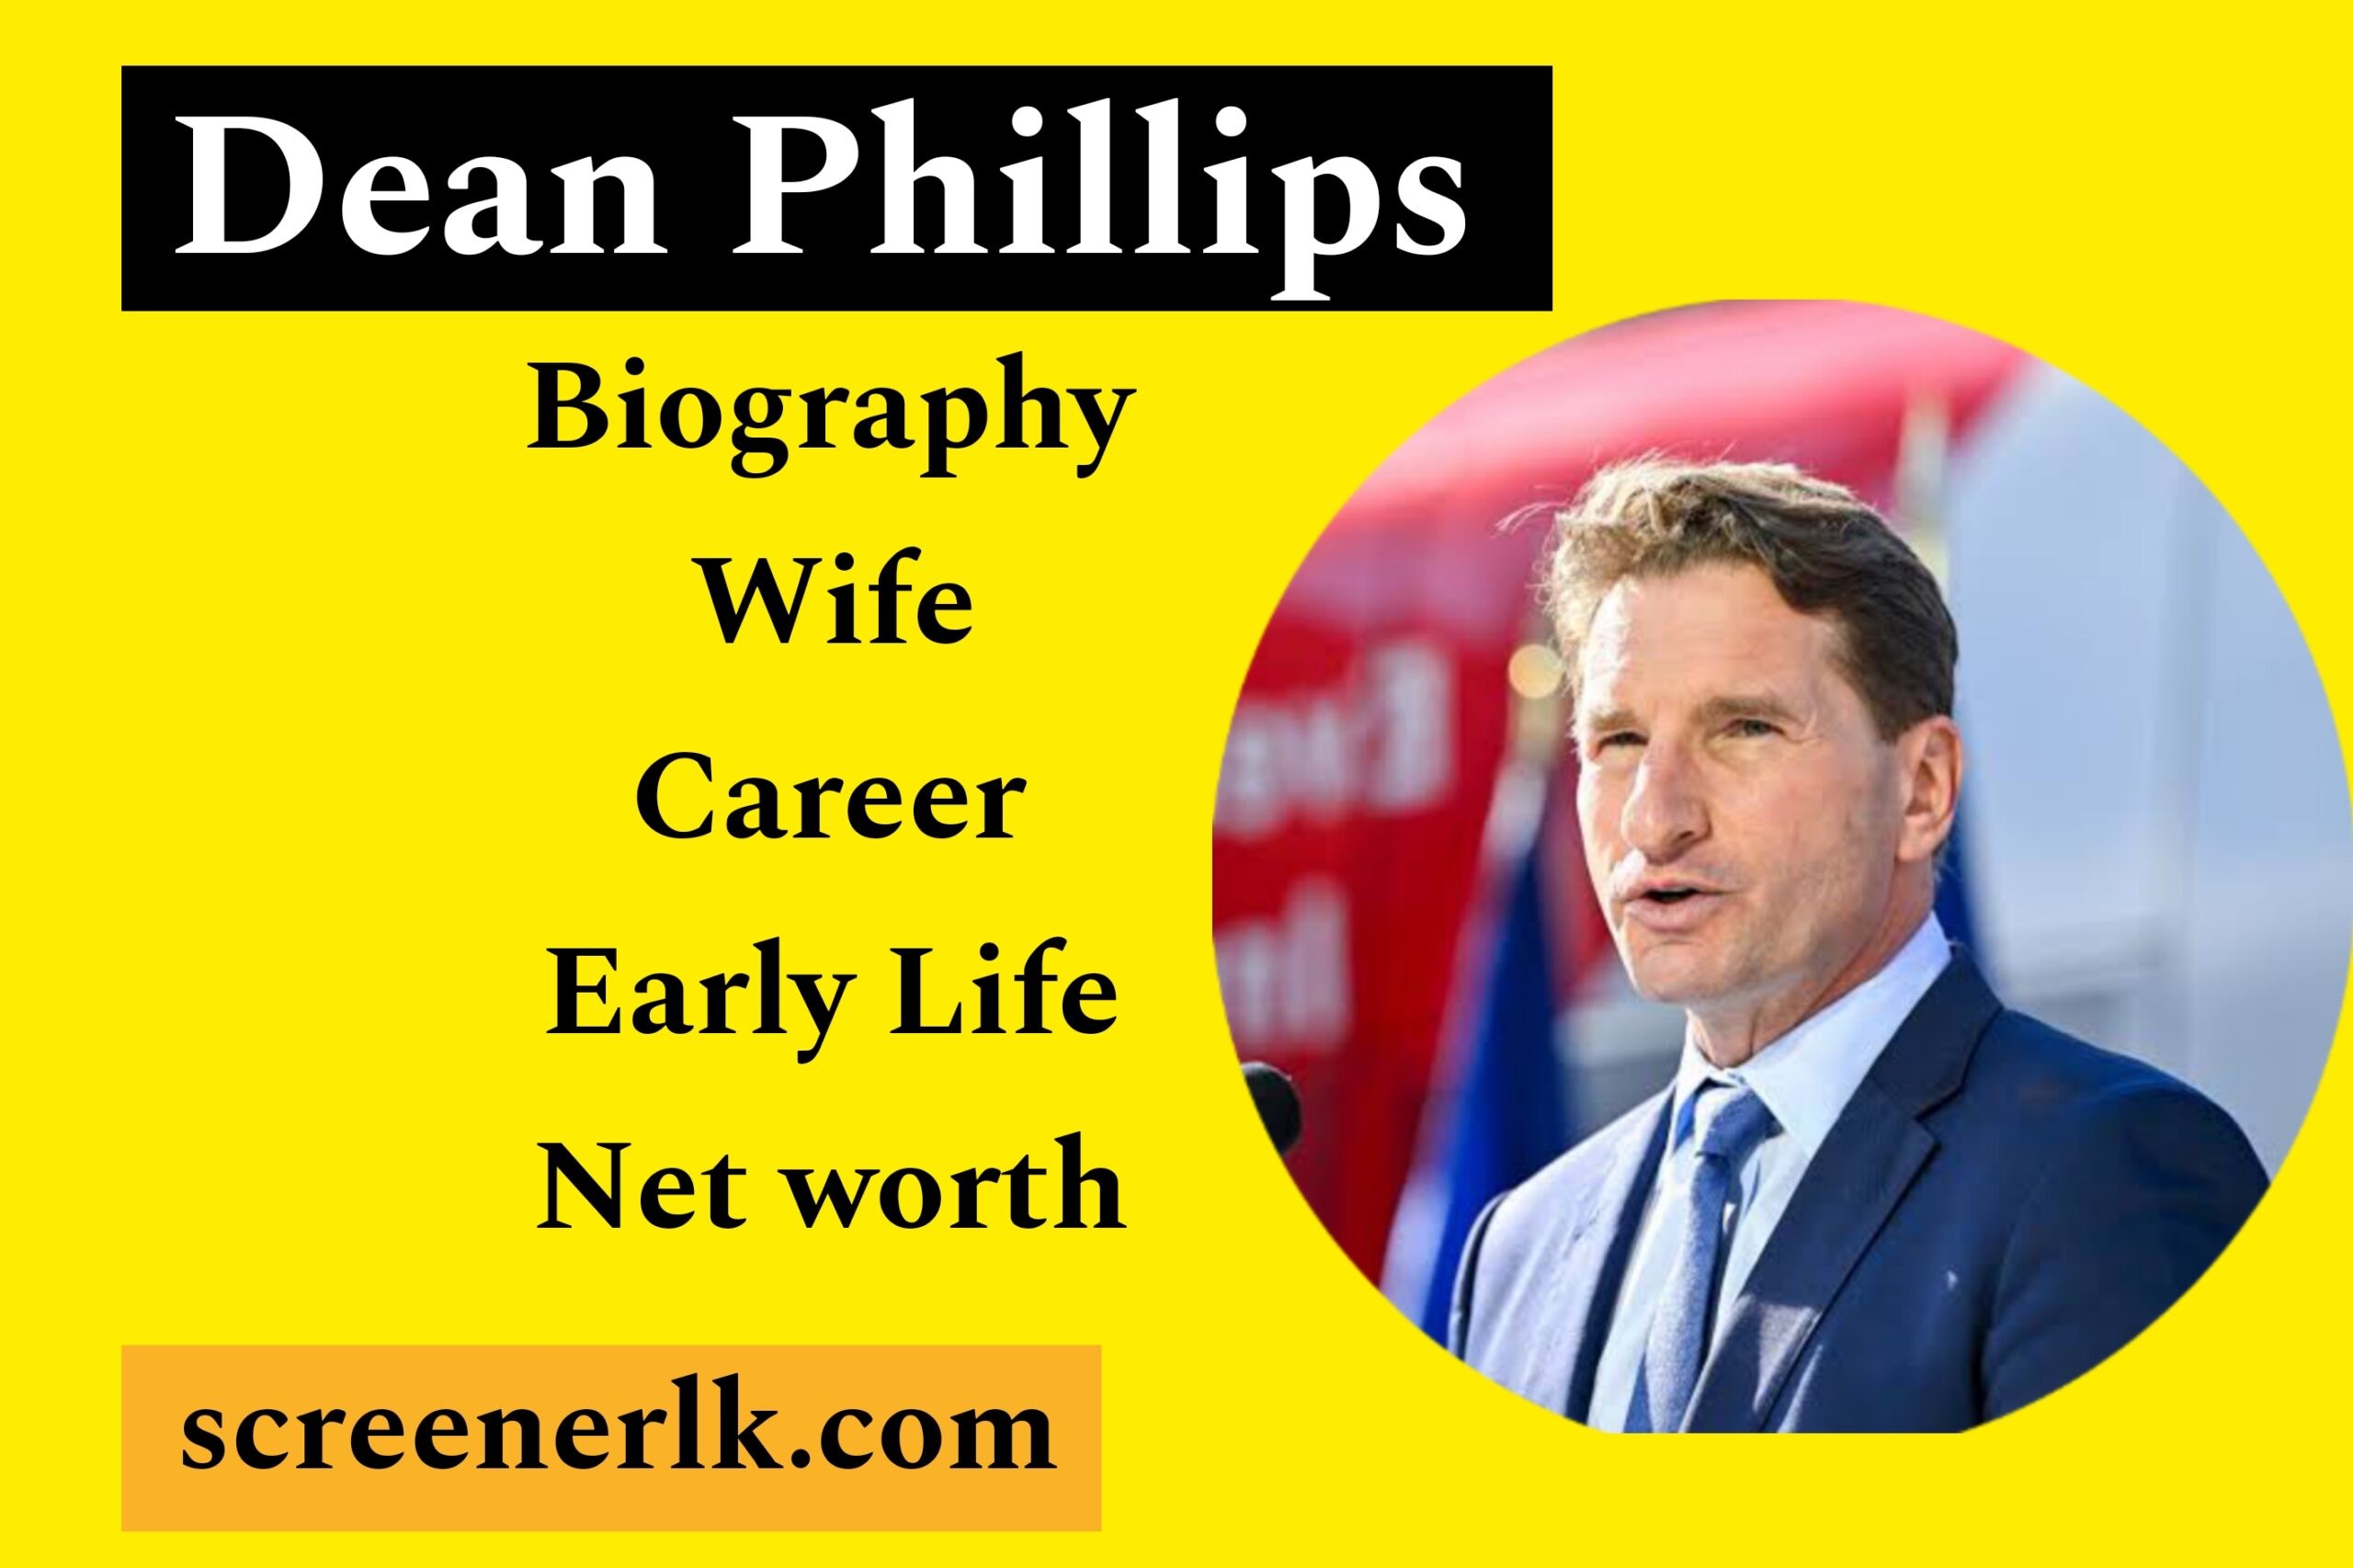 Dean Phillips Biography Net Worth, Bio, Age, Height, wife, Career